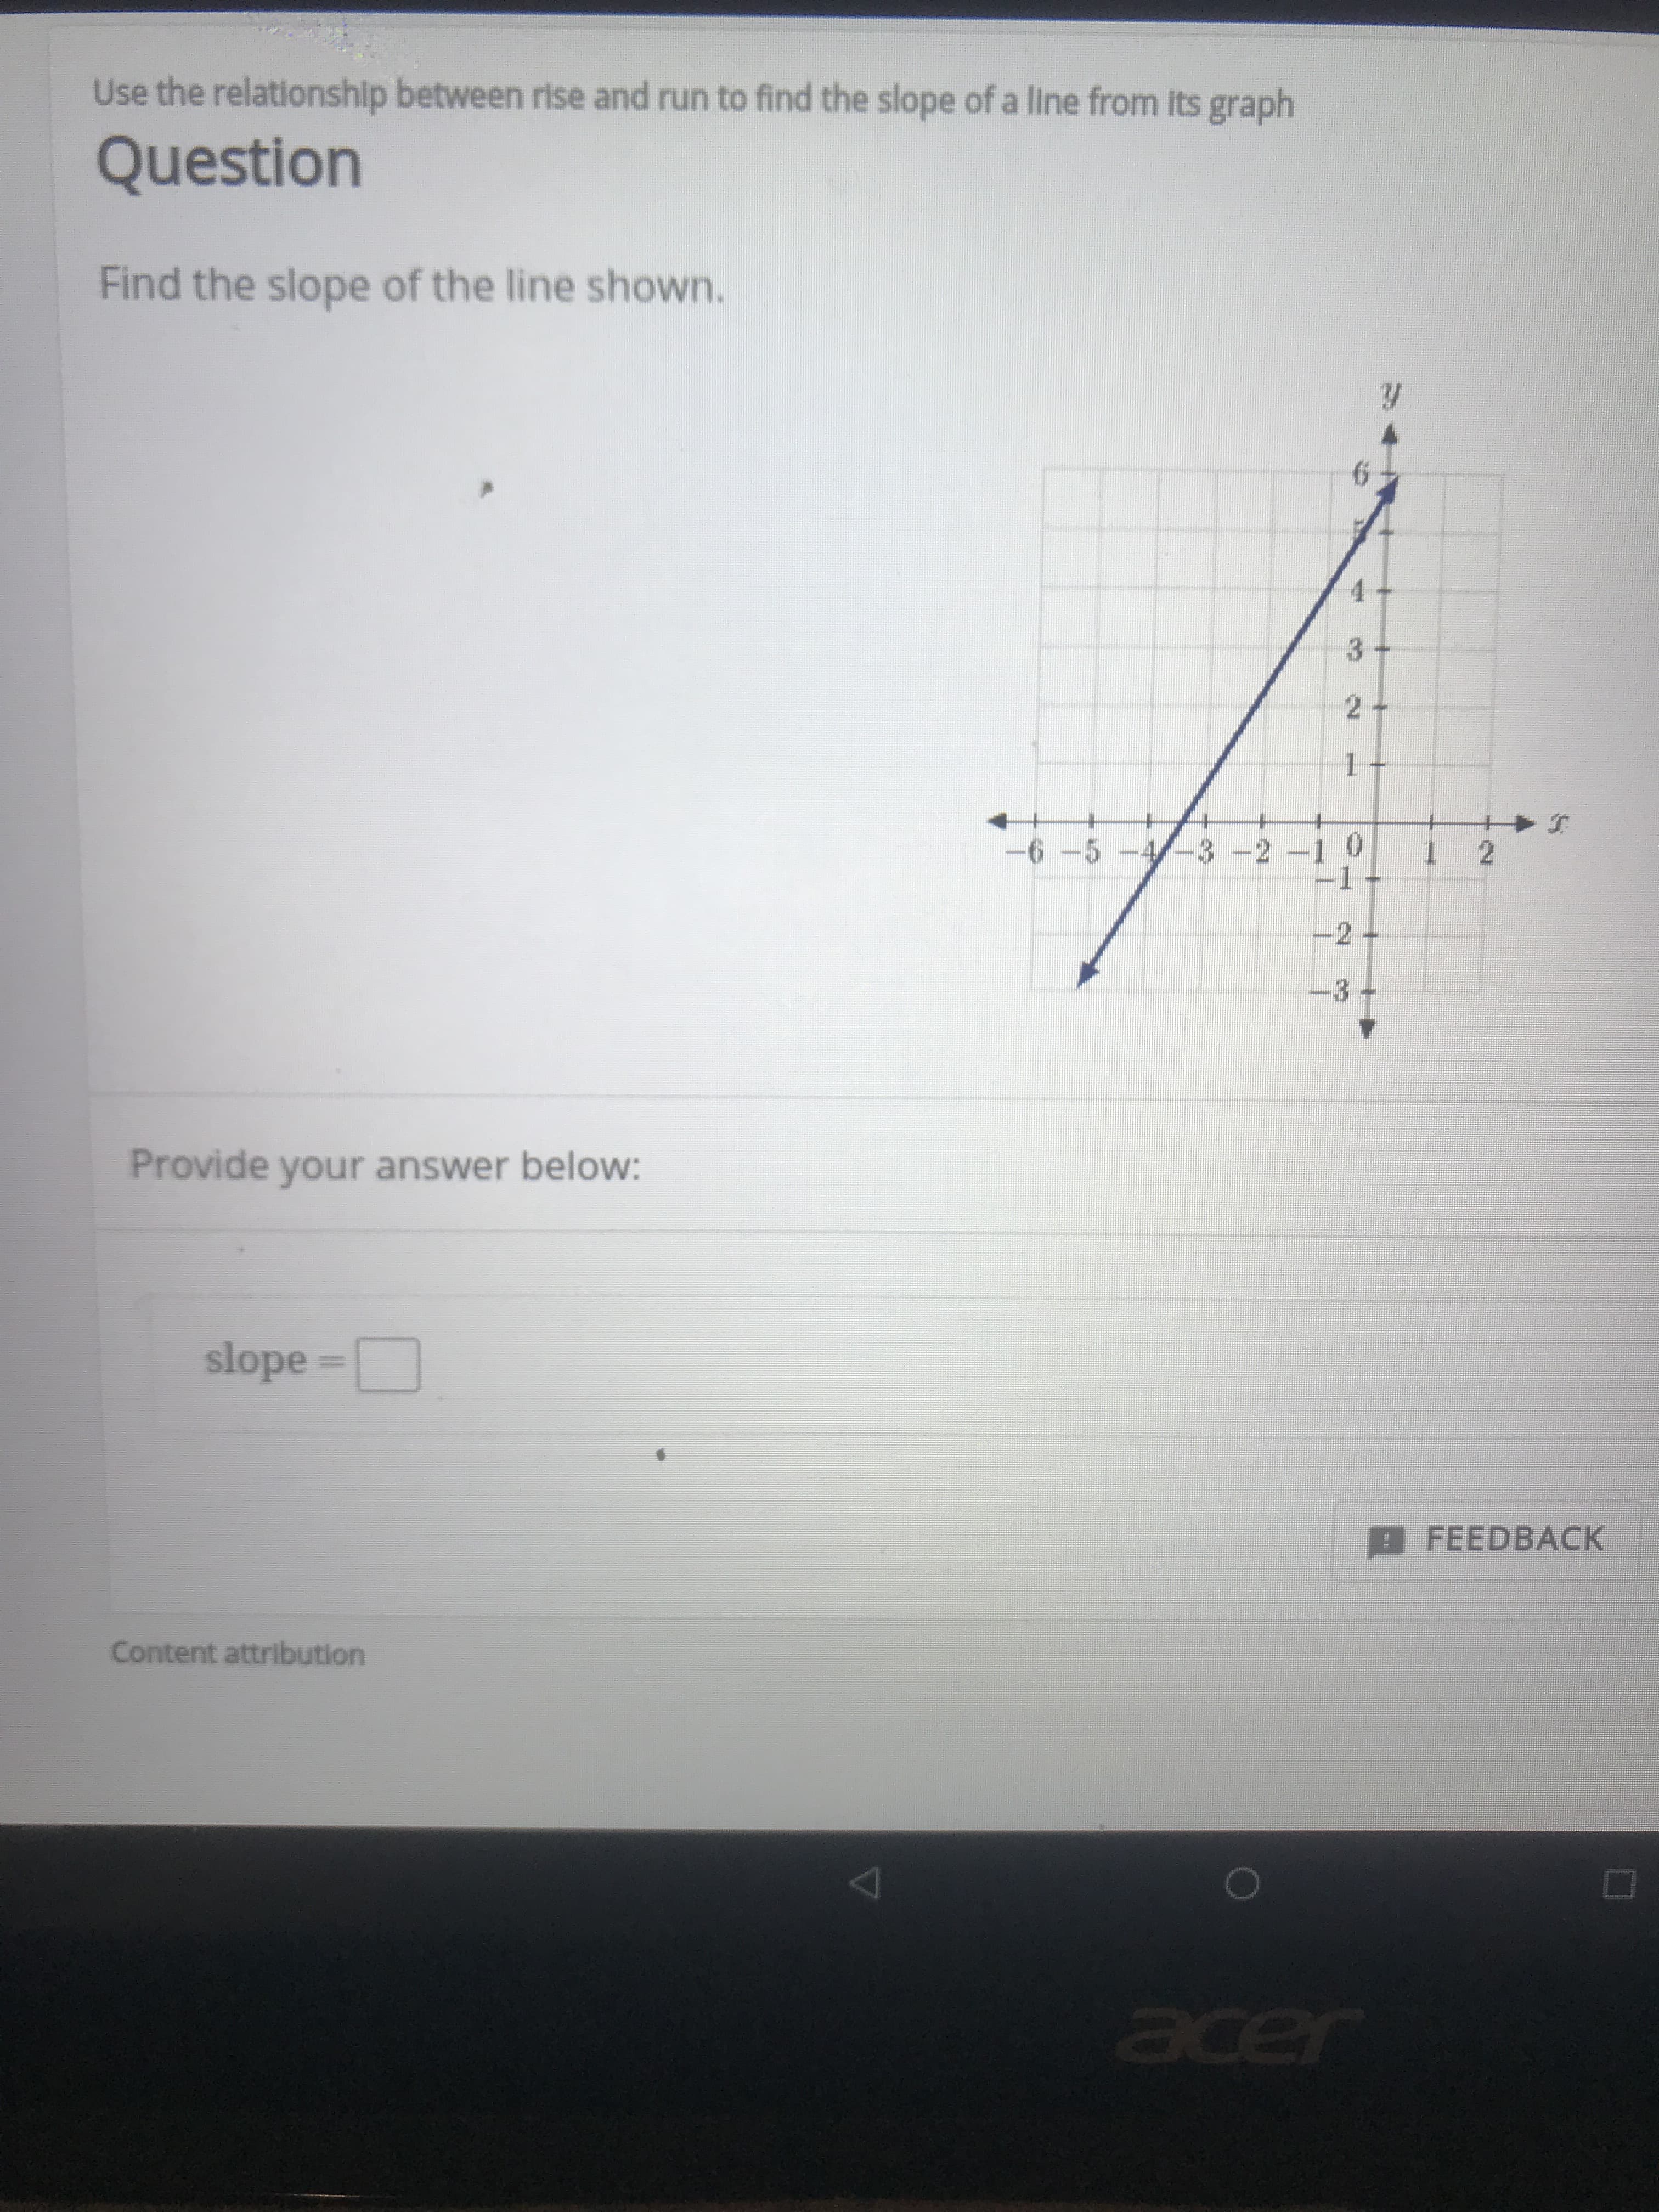 Use the relationship between rise and run to find the slope of a line from its graph
Question
Find the slope of the line shown.
6
3 +
2 +
6 -5 -4/-3 -2-1 0
-1
1 2
-2 +
3 +
Provide your answer below:
slope
BFEEDBACK
Content attribution
acer
